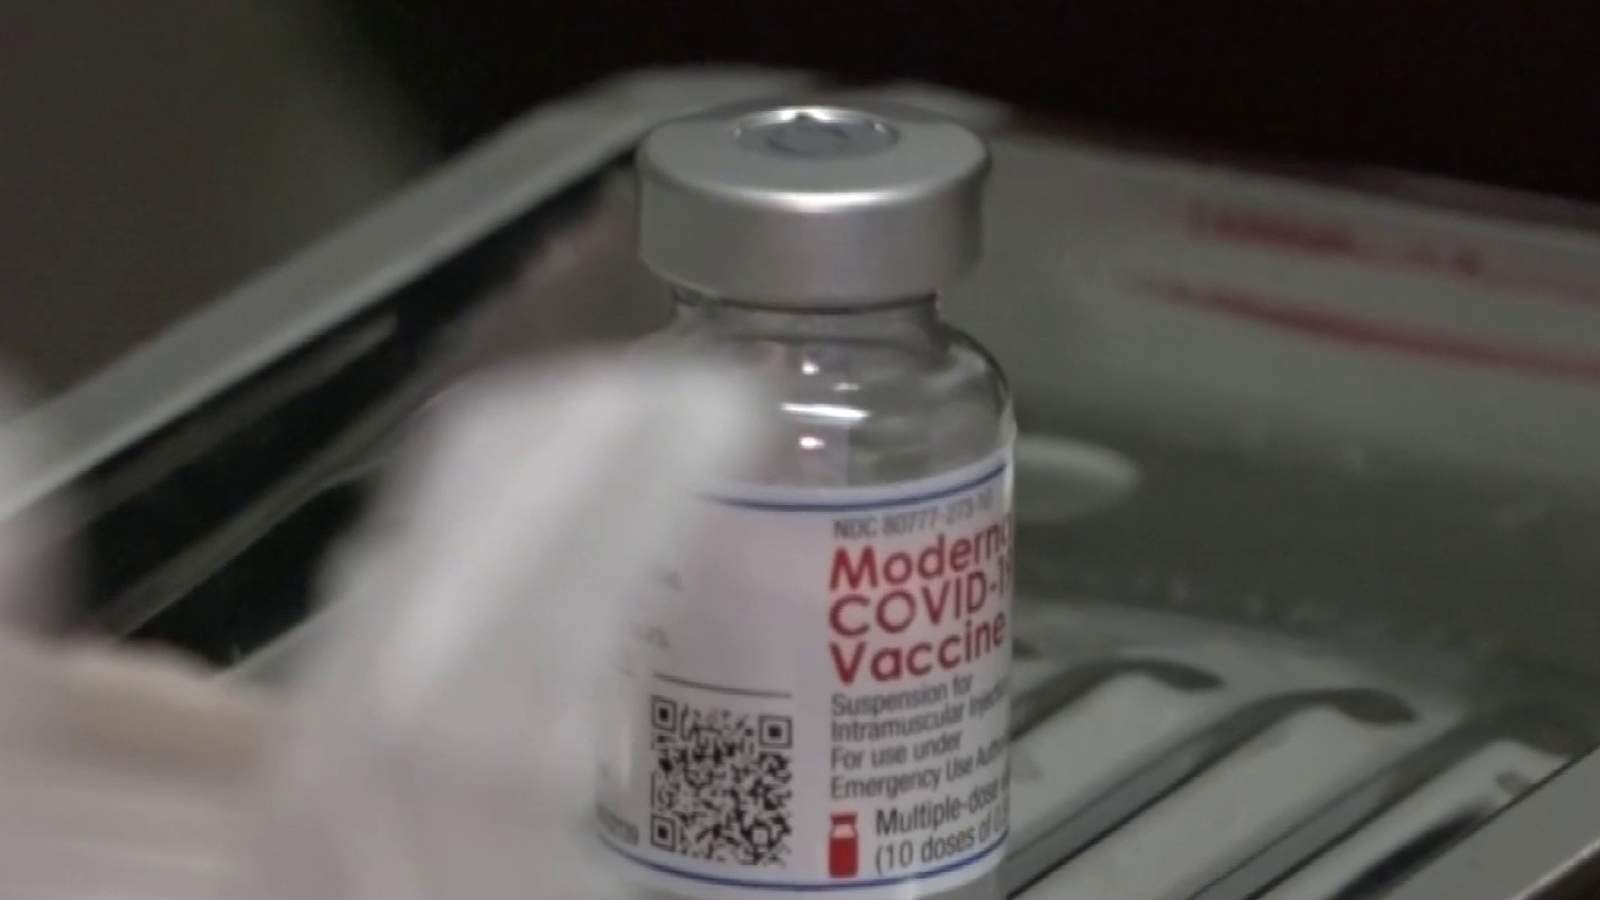 Hotline to register 65 and older for the vaccine extended in Roanoke Valley